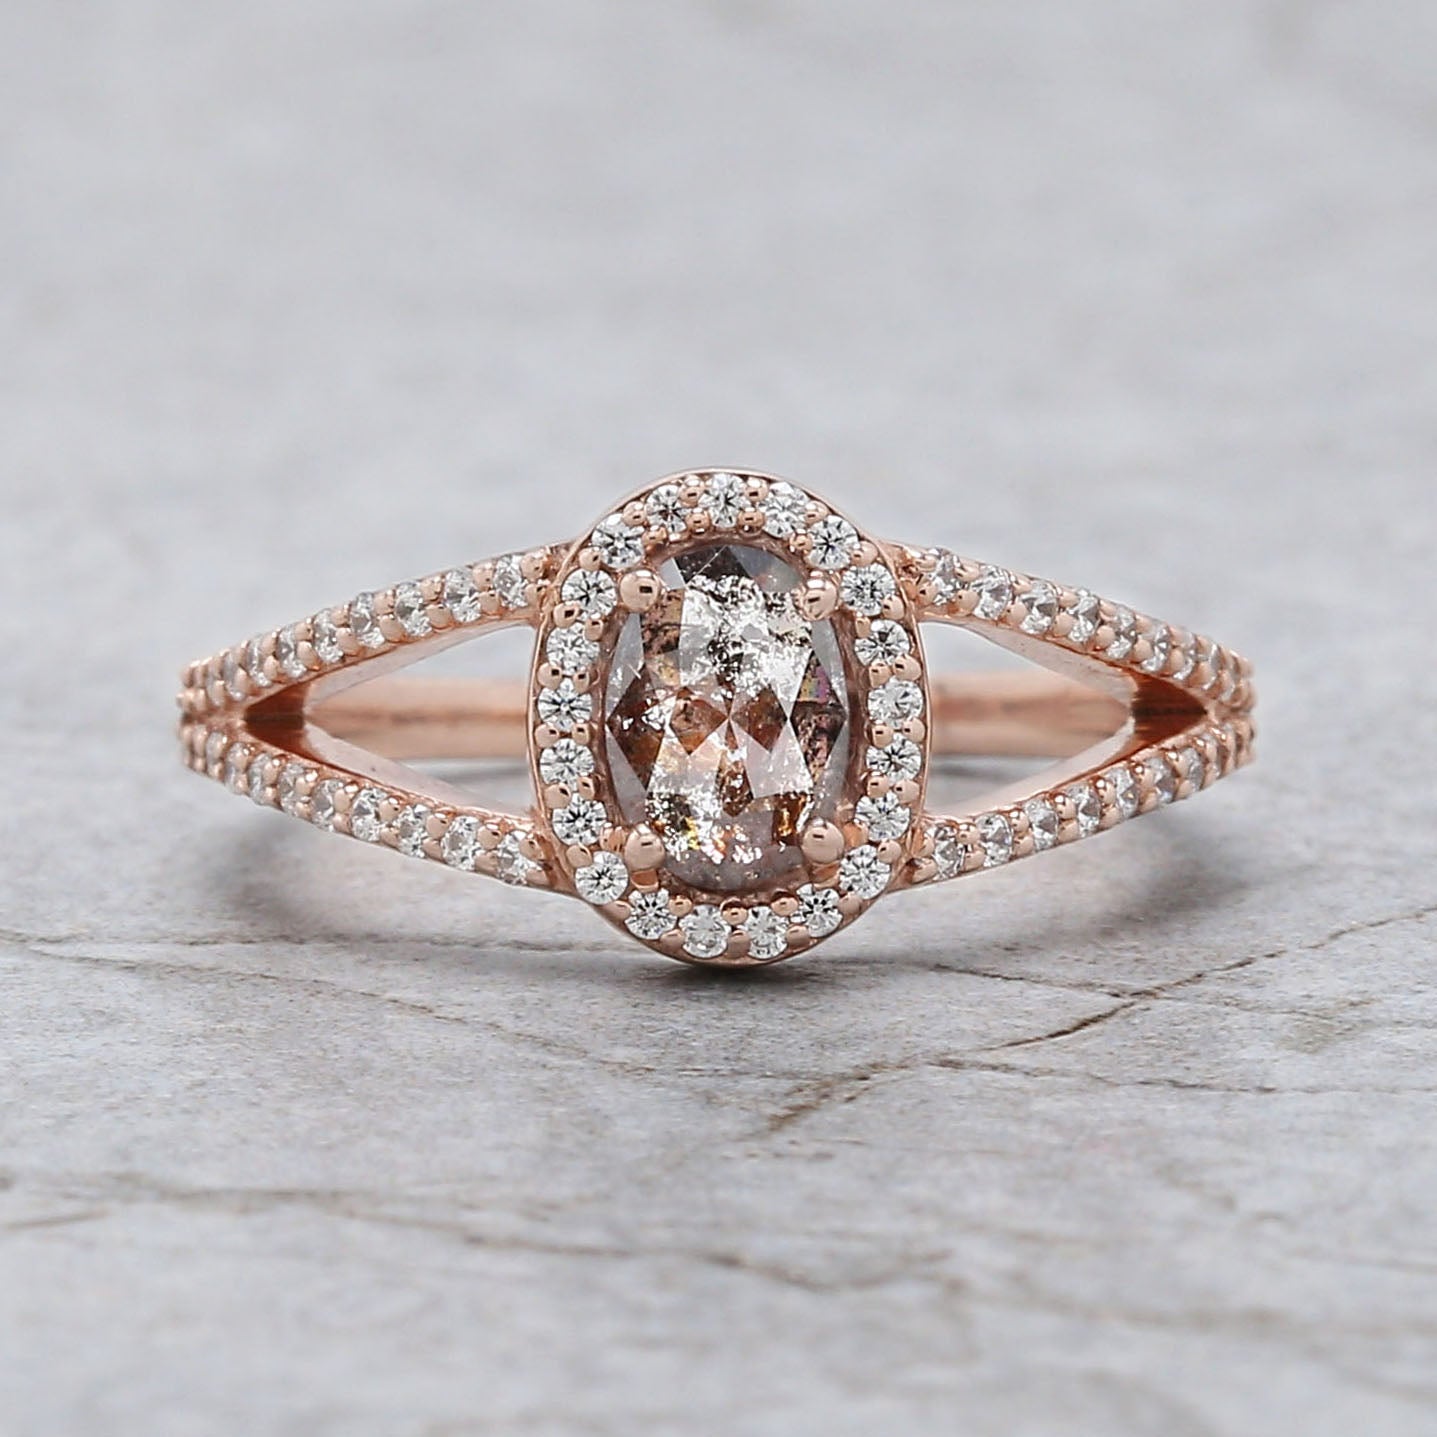 Oval Cut Brown Color Diamond Ring 0.55 Ct 6.40 MM Oval Diamond Ring 14K Solid Rose Gold Silver Oval Engagement Ring Gift For Her QK2220